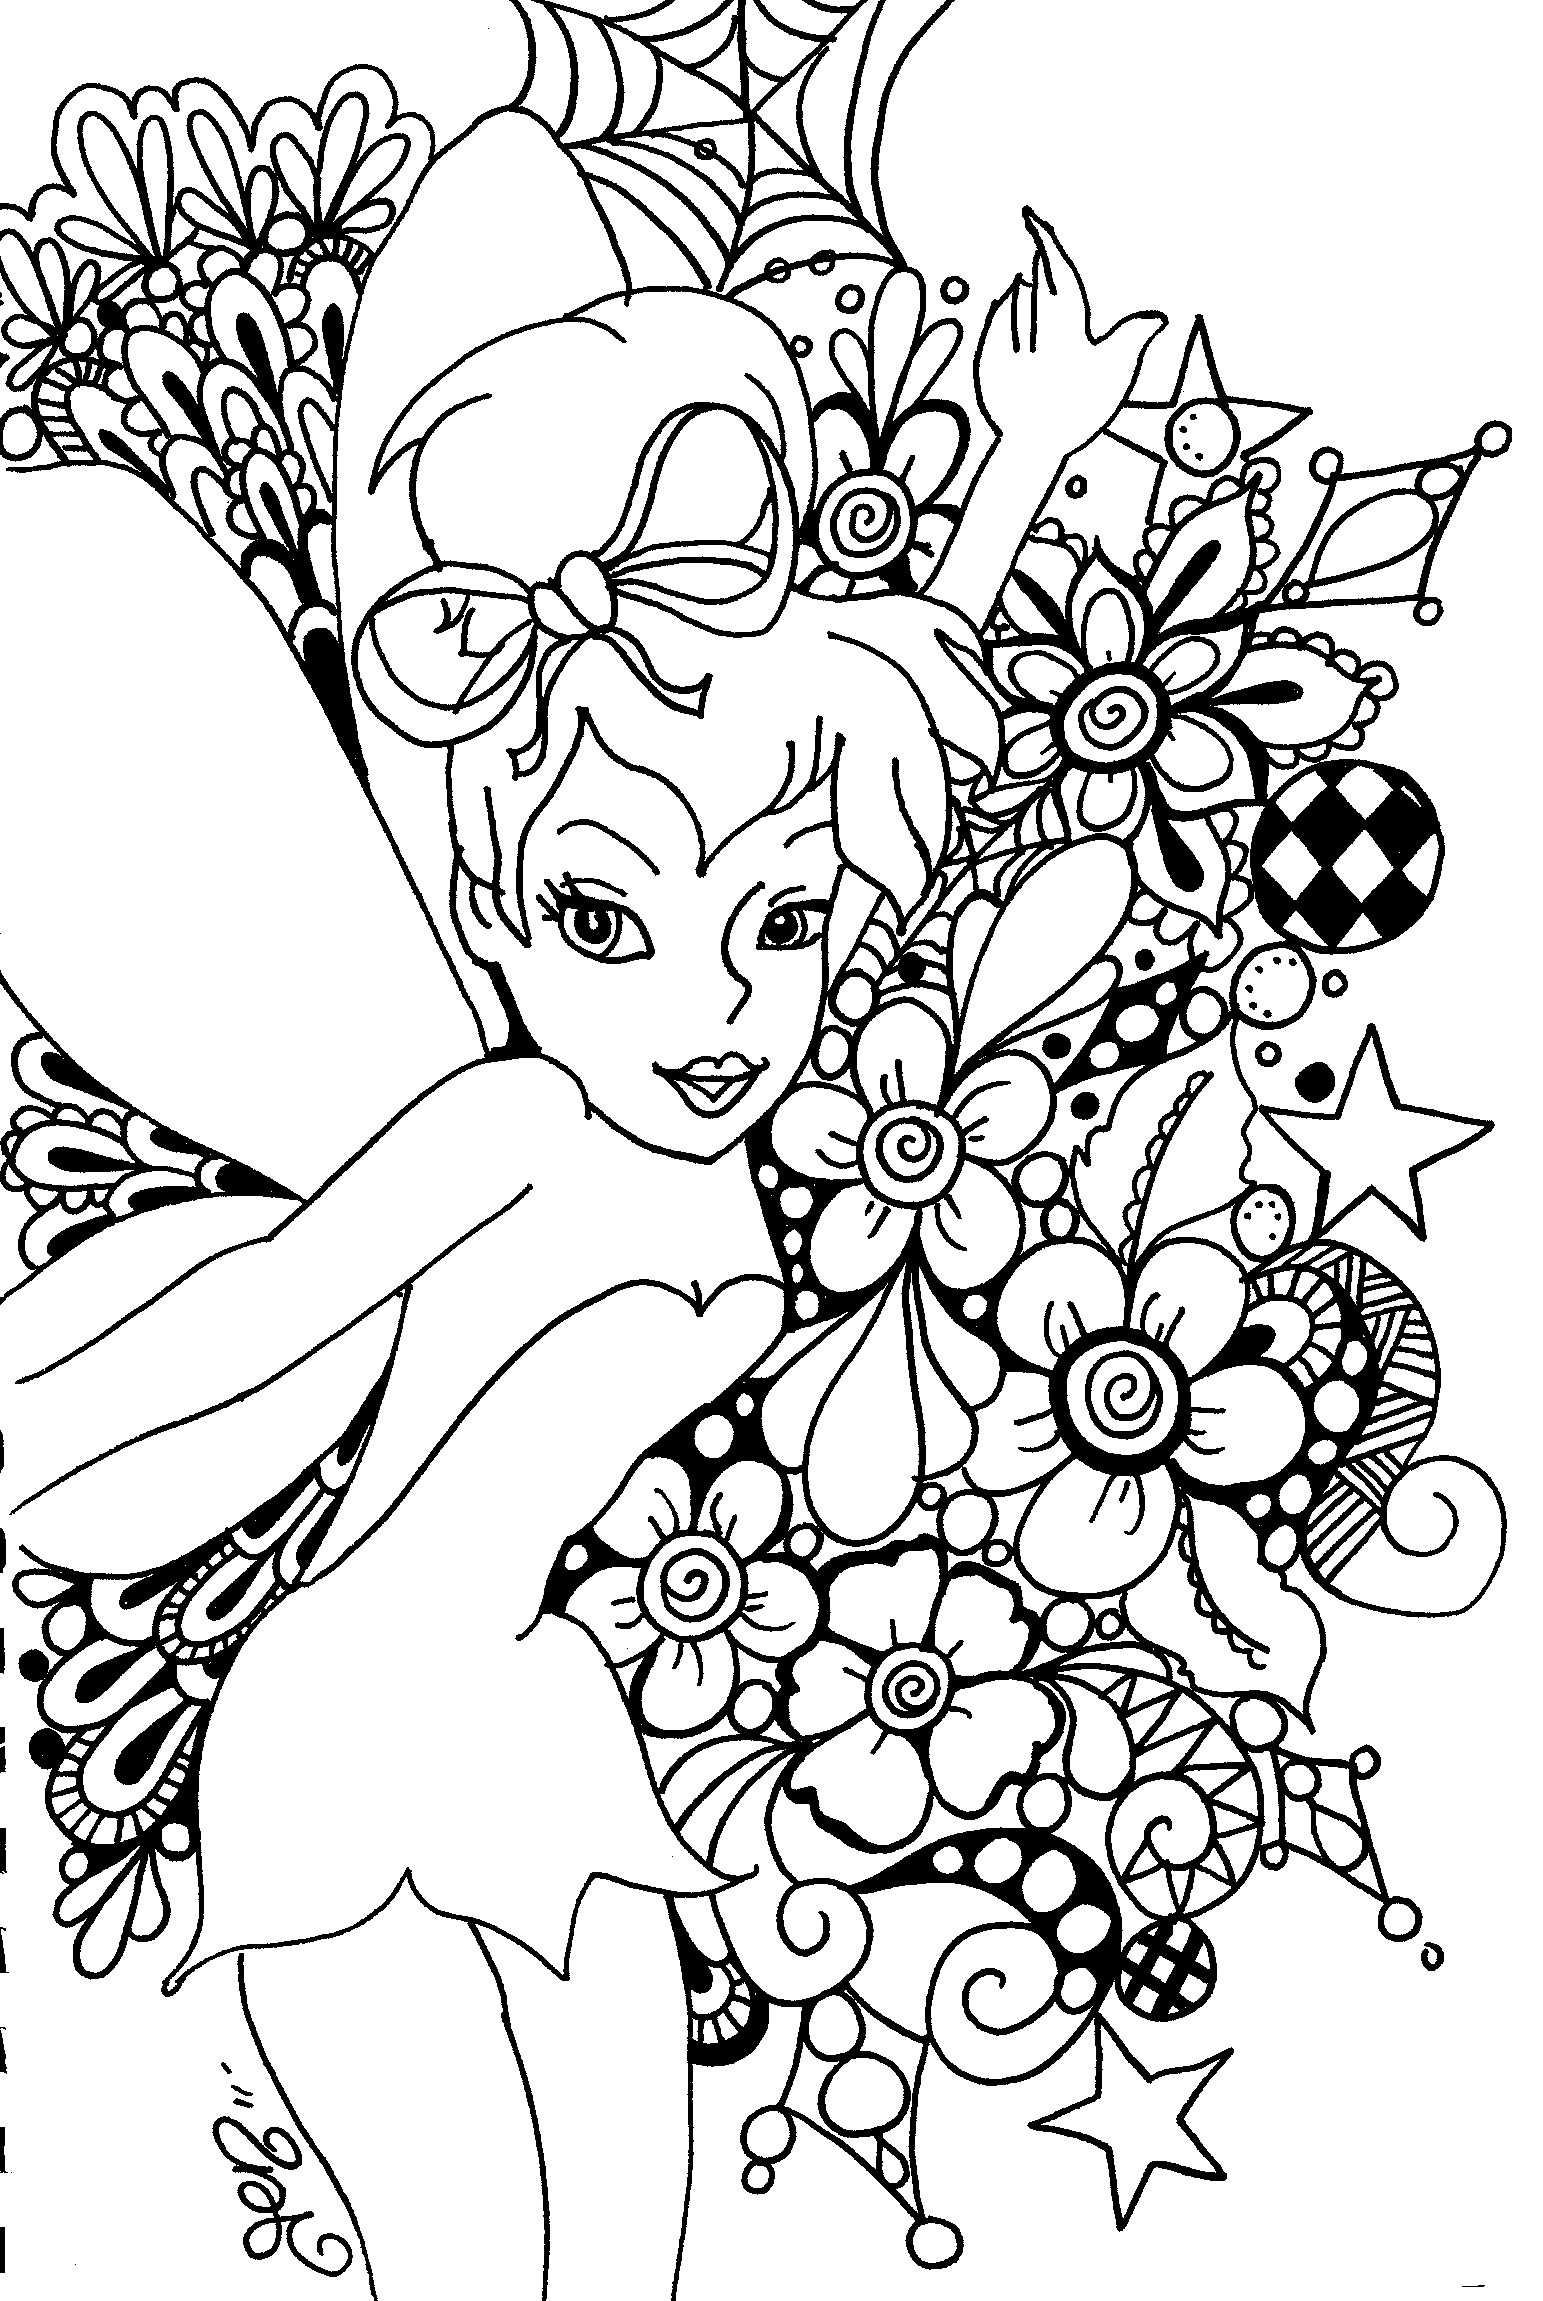 Disney Coloring Pages For Girls
 36 Disney Tinkerbell coloring pages for Girls